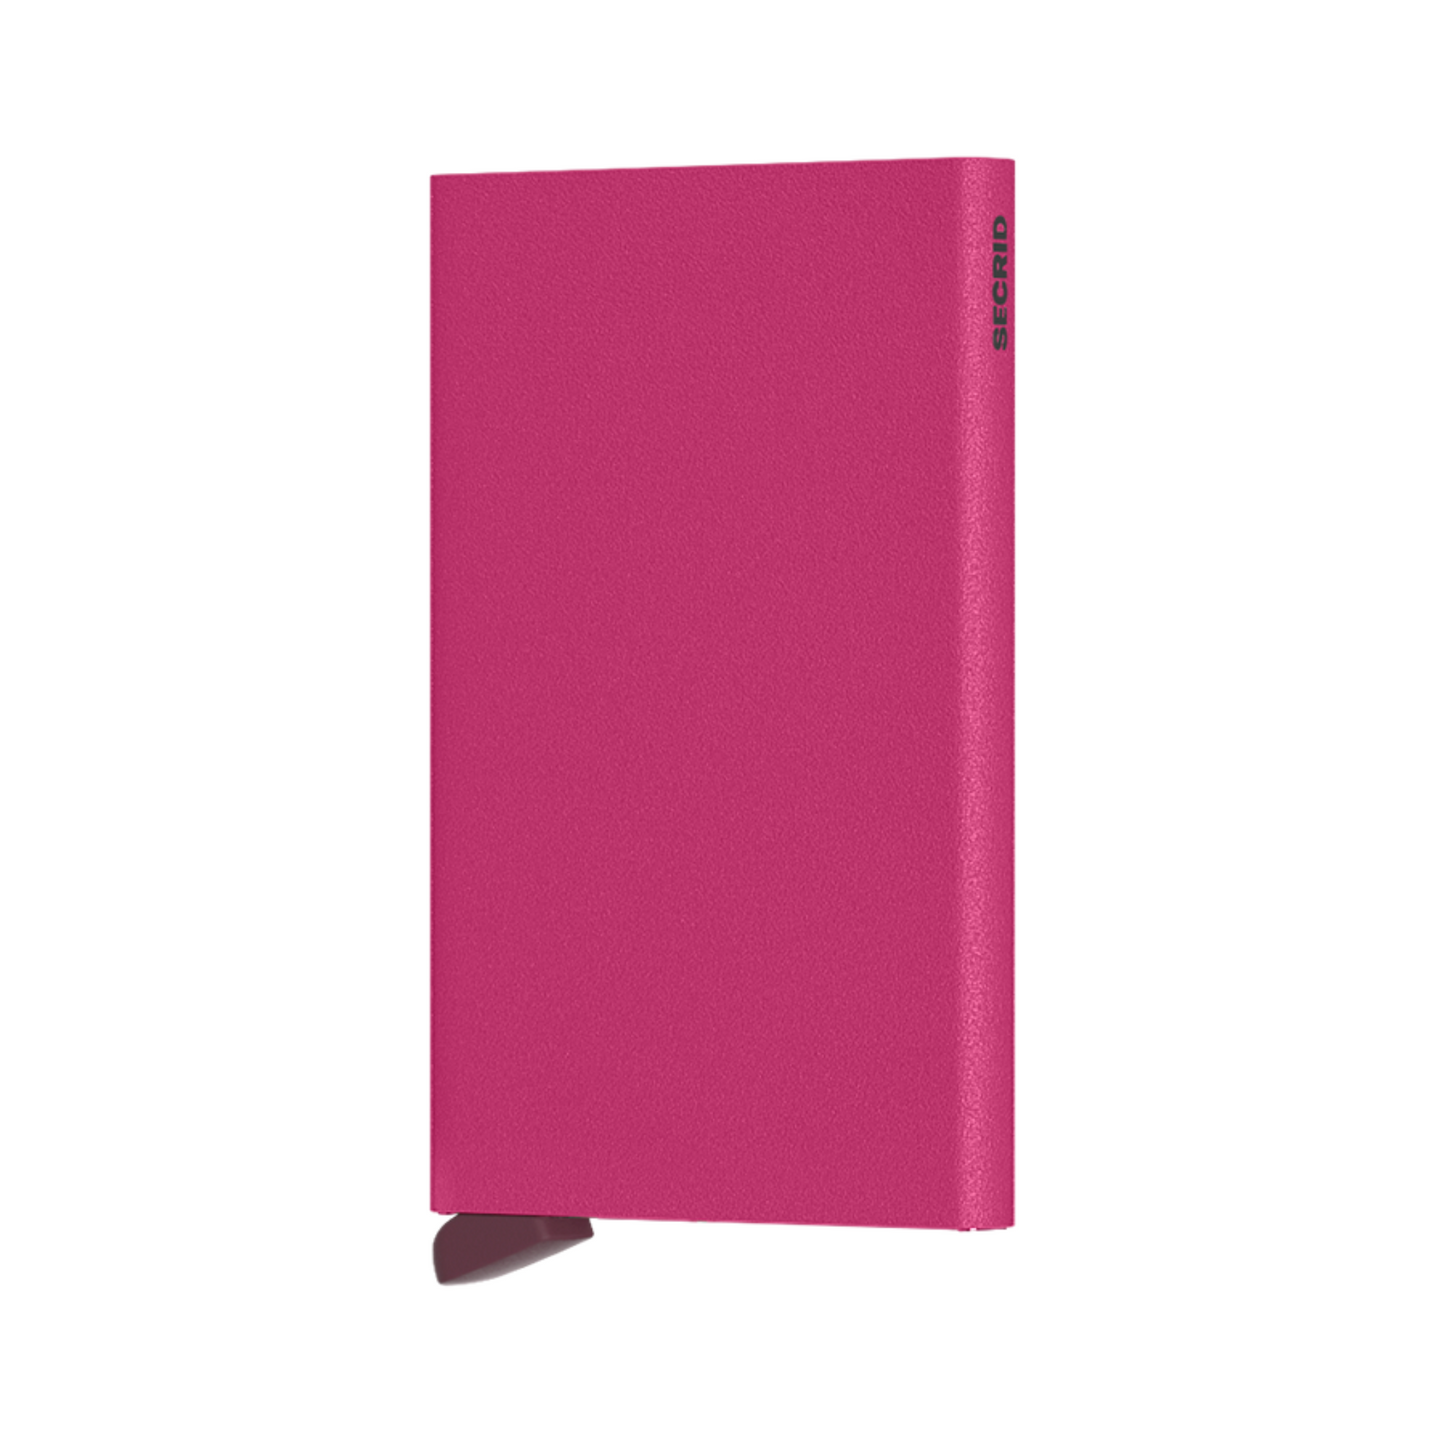 Textured pink rectangular wallet with maroon bottom tab and small grey logo on side.